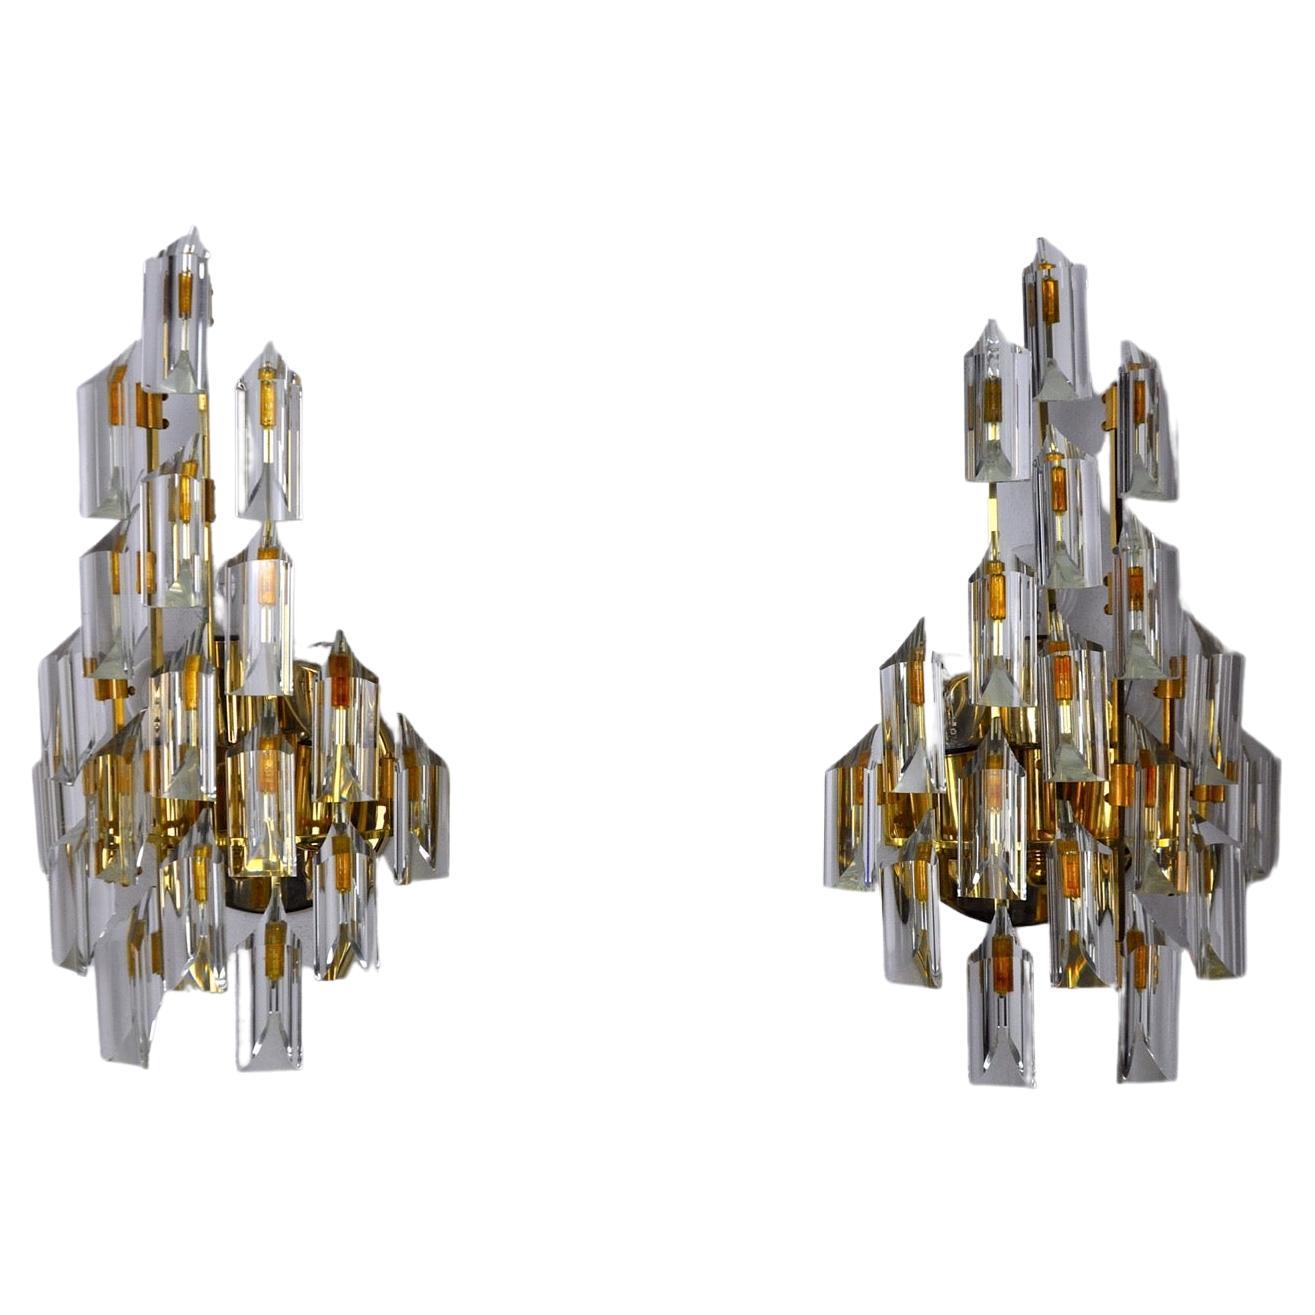 Pair of Oscar Torlasco Wall Lamps, Triedri Glass, Italy, 1970 For Sale